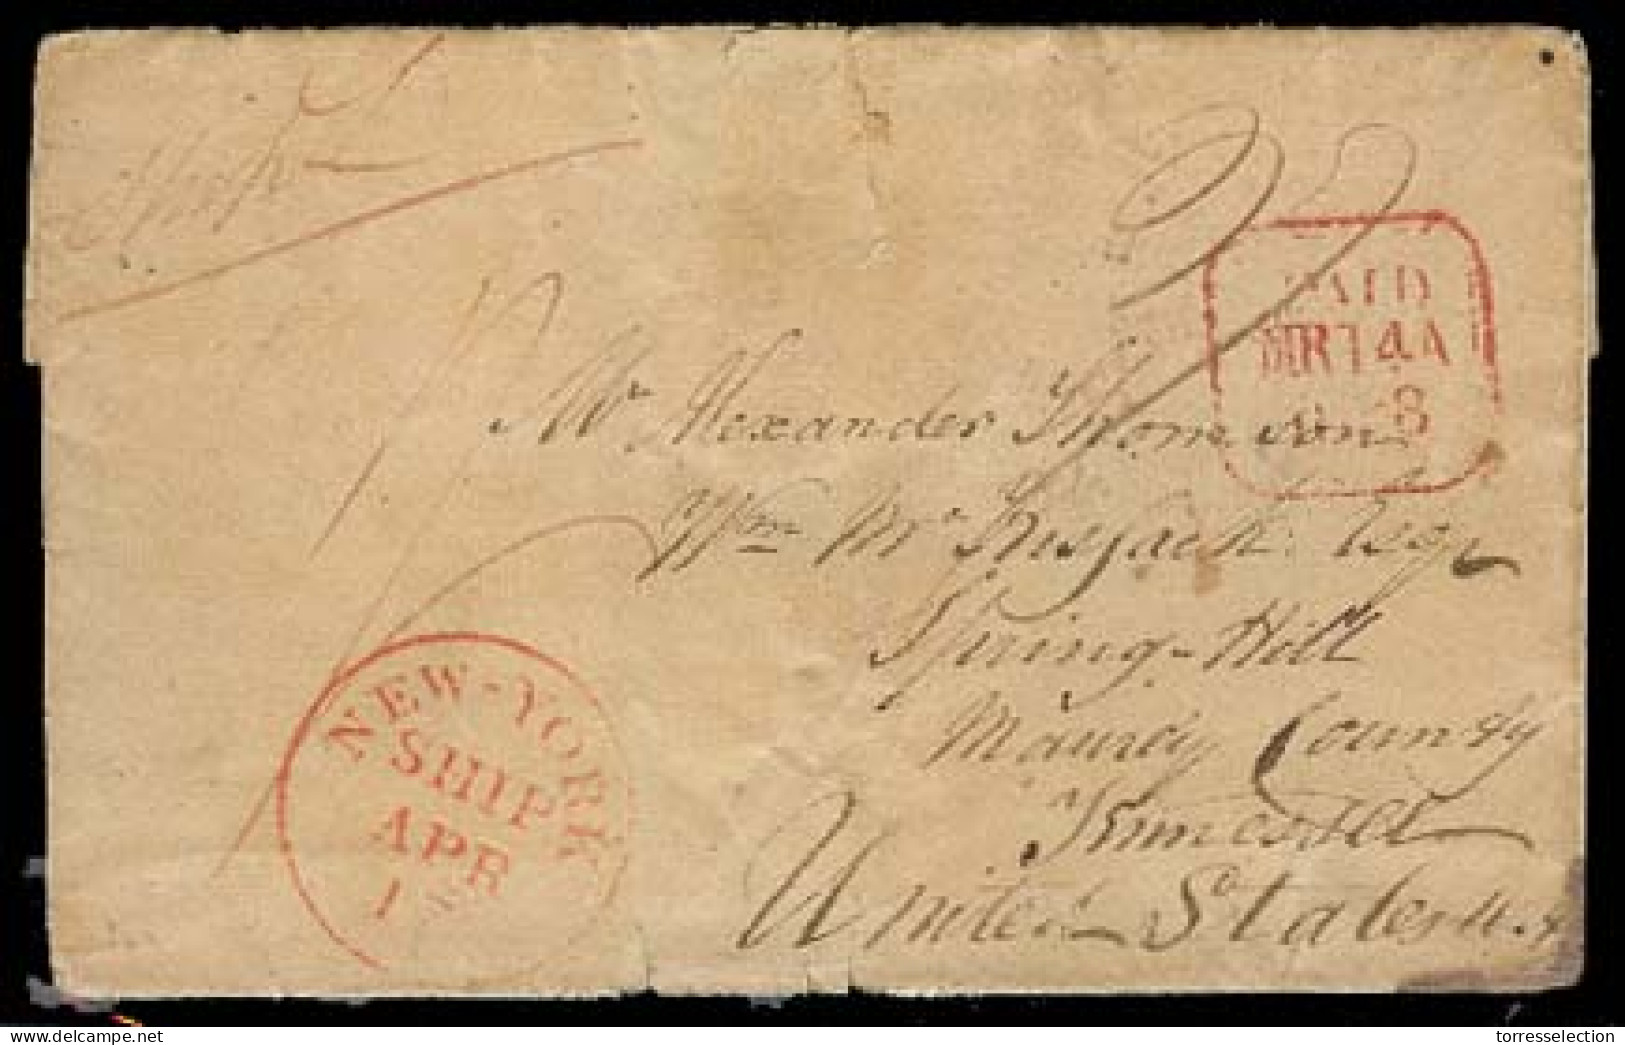 EIRE. 1838 (14 March). Dublin - USA / Spring Hill, Tennessee. EE Red Paid Box, NY/ Ship 17 April + 1 Sh + Other Charges. - Oblitérés